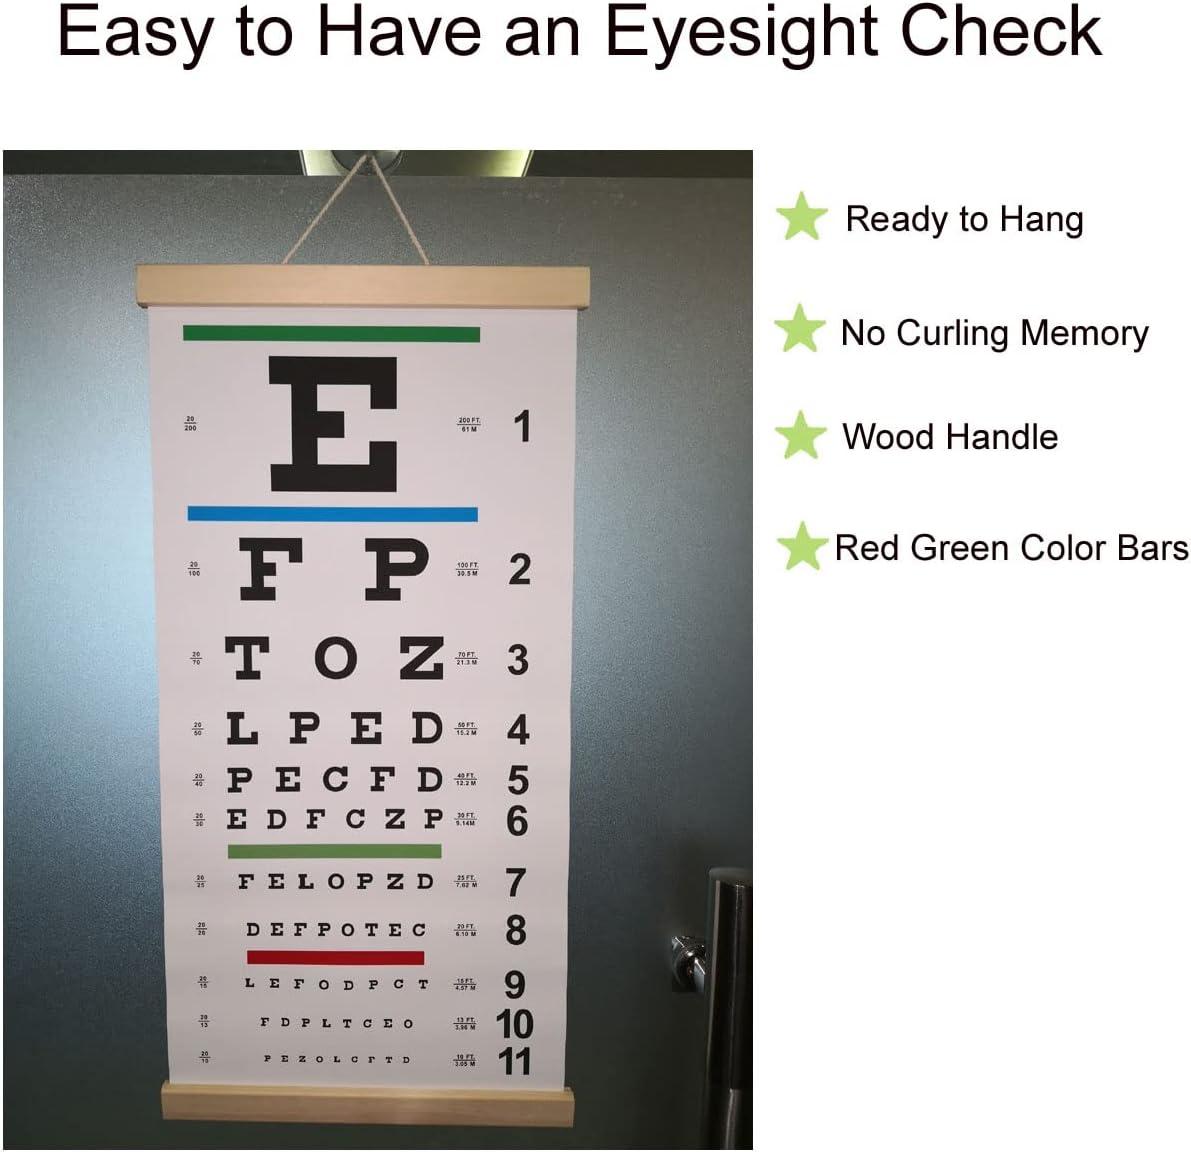 NOYOC Eye Charts for Eye Exams 20 Feet, Snellen Eye Chart with Wooden Frame for Wall Decor, 22x11 Inches Canvas Low Vision Eye Chart with Eye Occluder